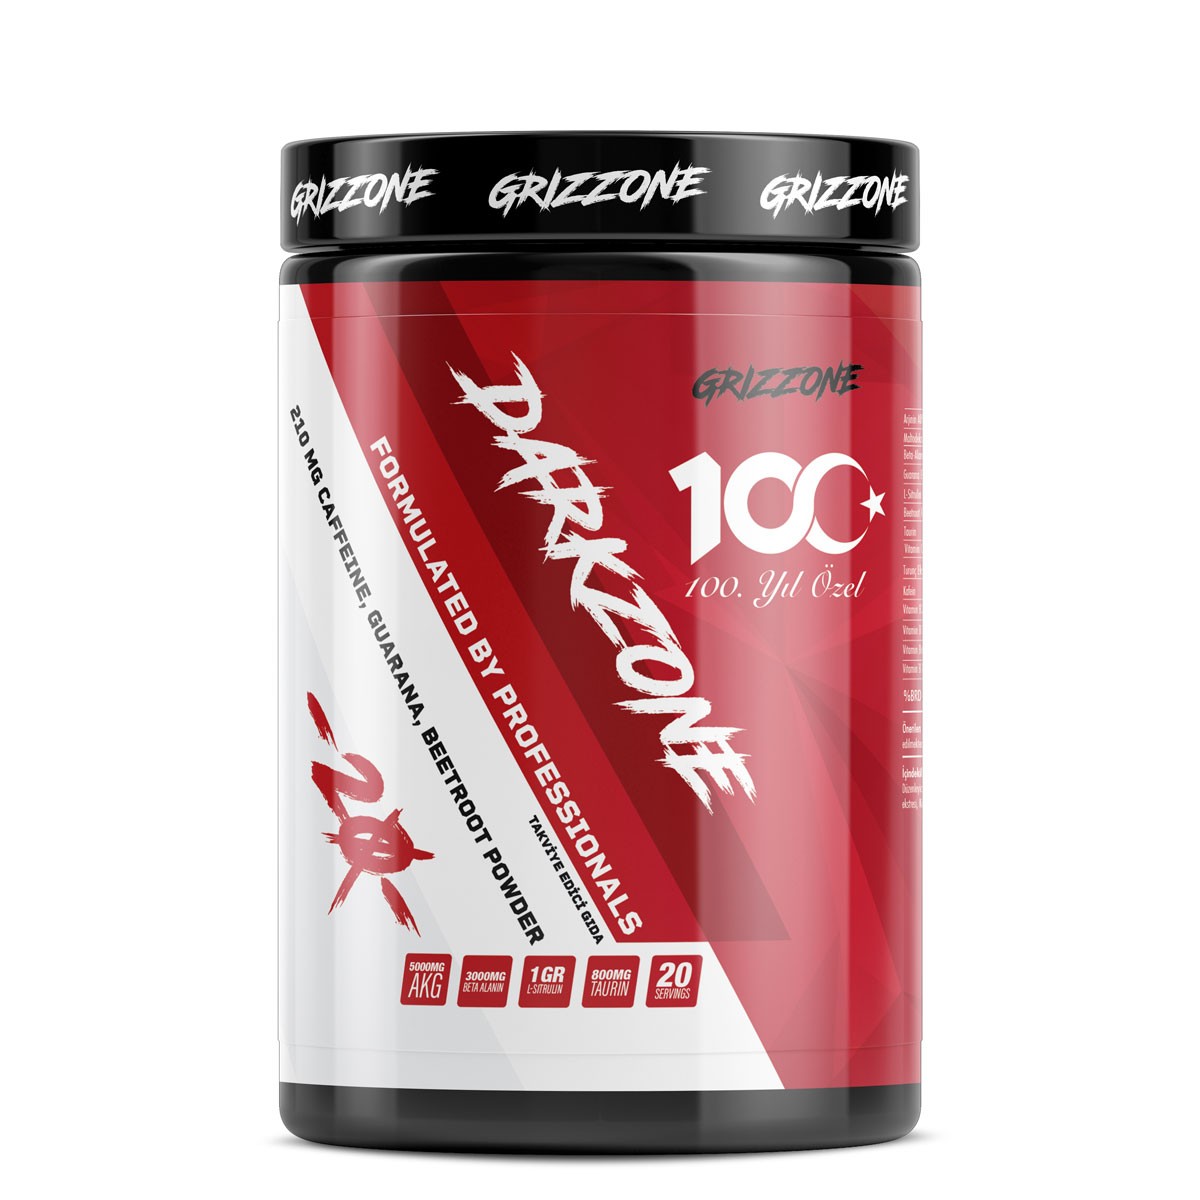 GRIZZONE DARKZONE PRE-WORKOUT 400 GR 100. YIL LIMITED EDITION